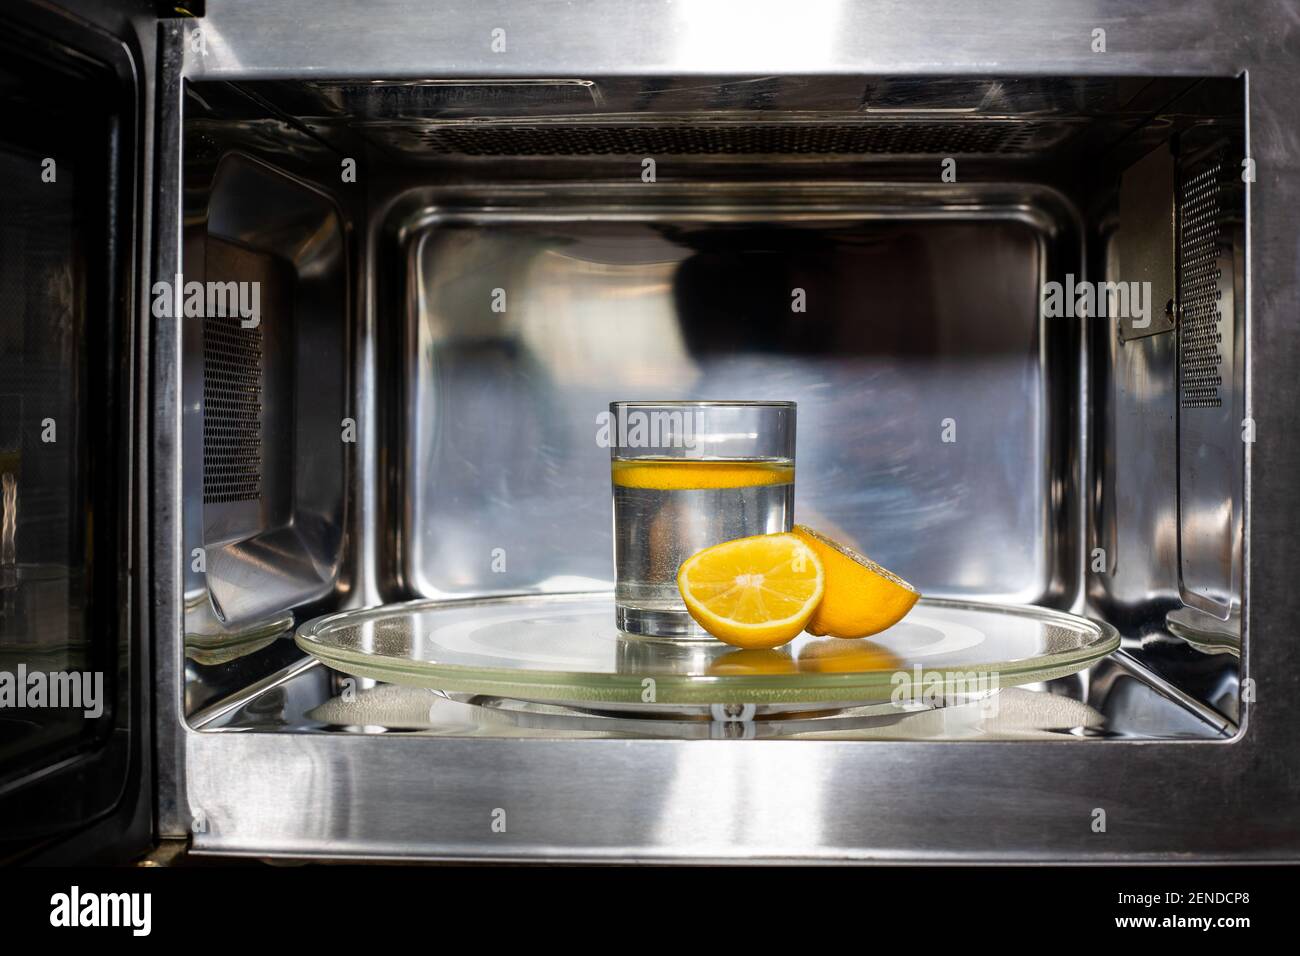 Process of cleaning or purifying the microwave oven by lemon and water Stock Photo